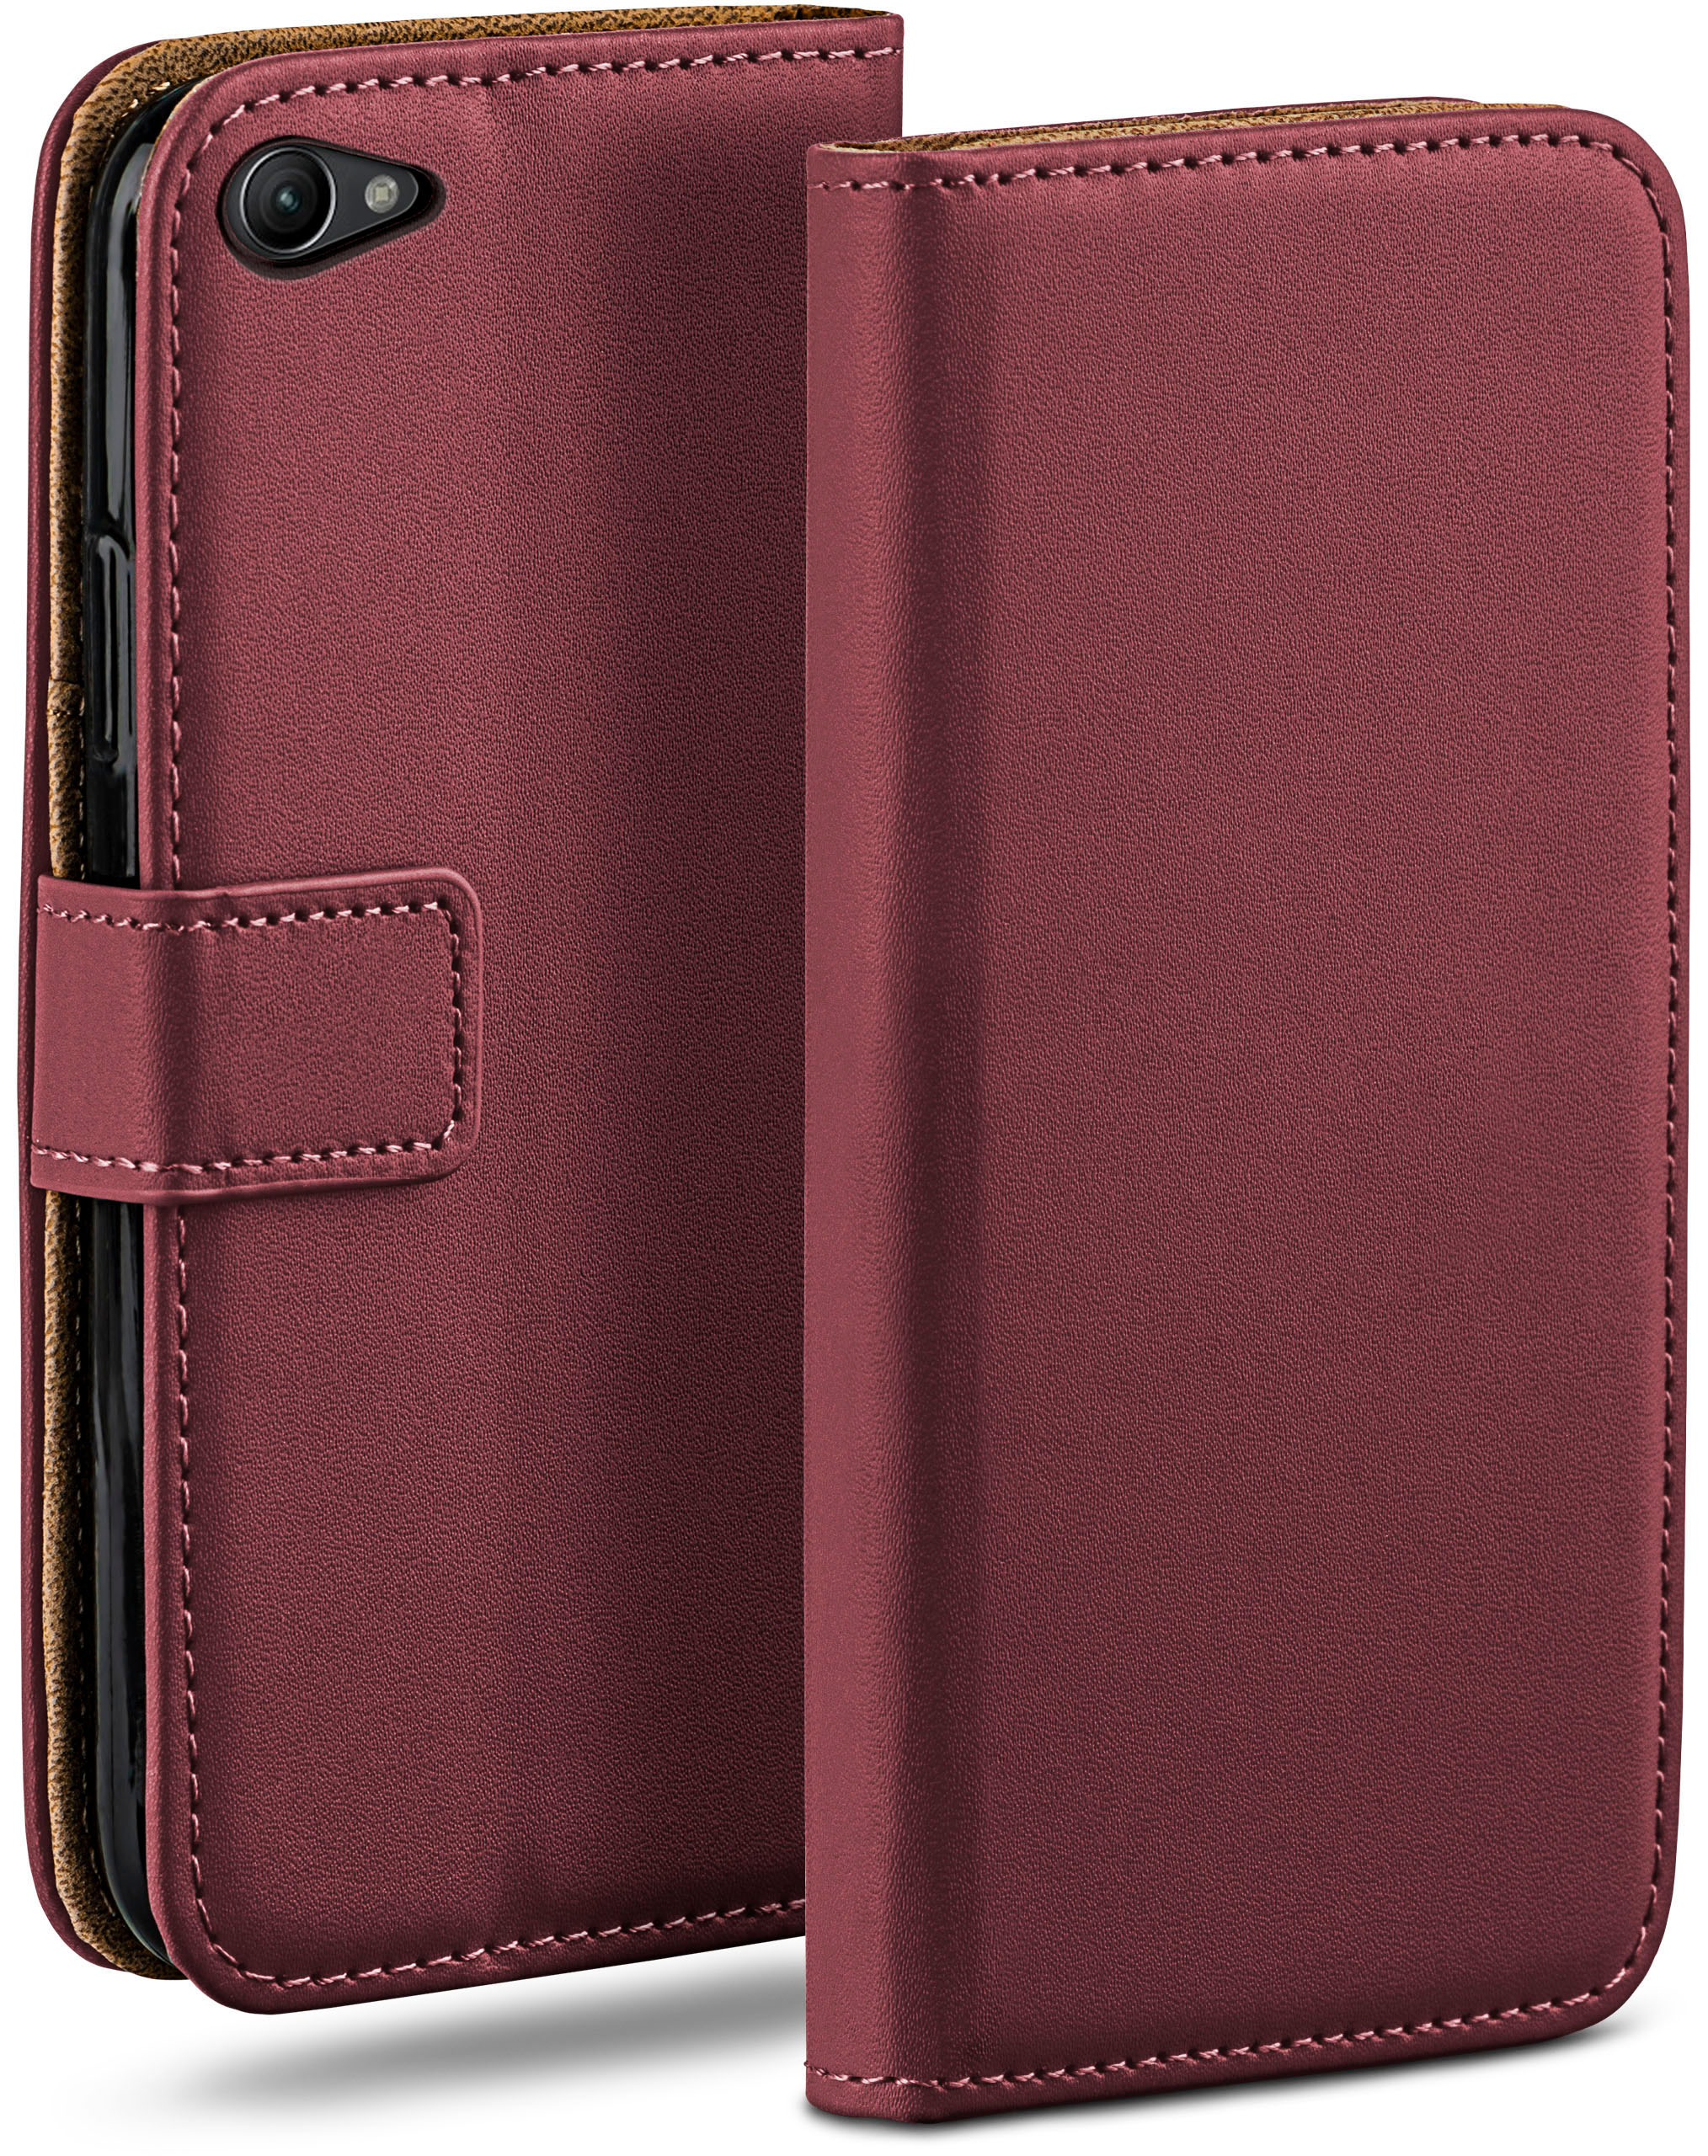 Bookcover, MOEX Z1 Xperia Sony, Compact, Case, Maroon-Red Book